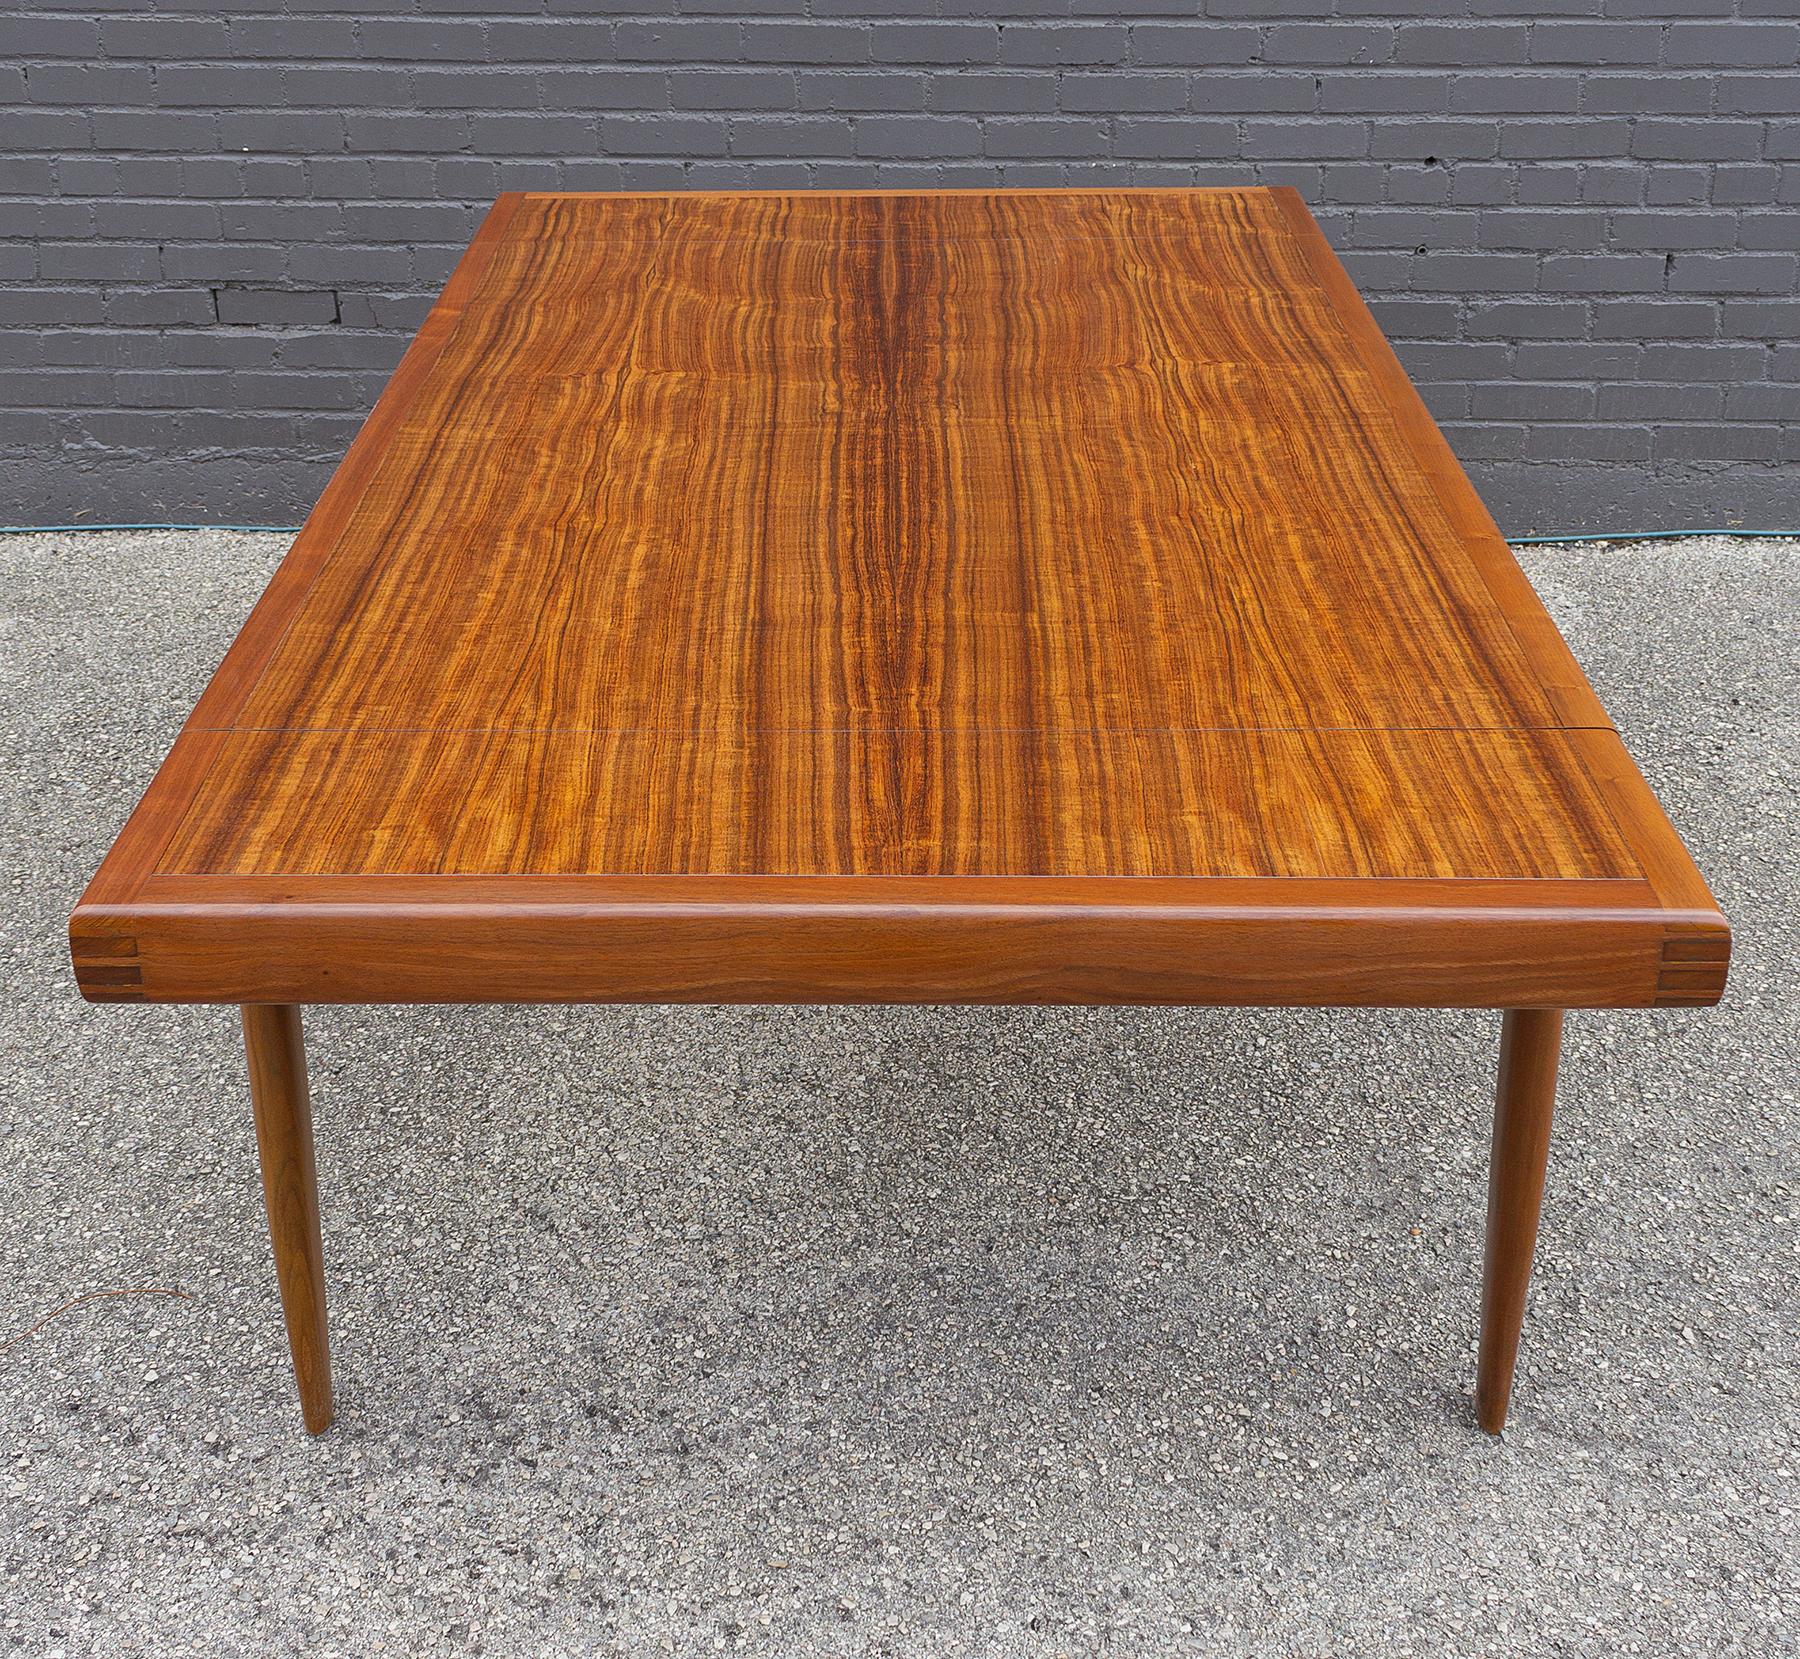 George Nakashima Dining Table & Chairs Widdicomb Origins Collection 1959 11